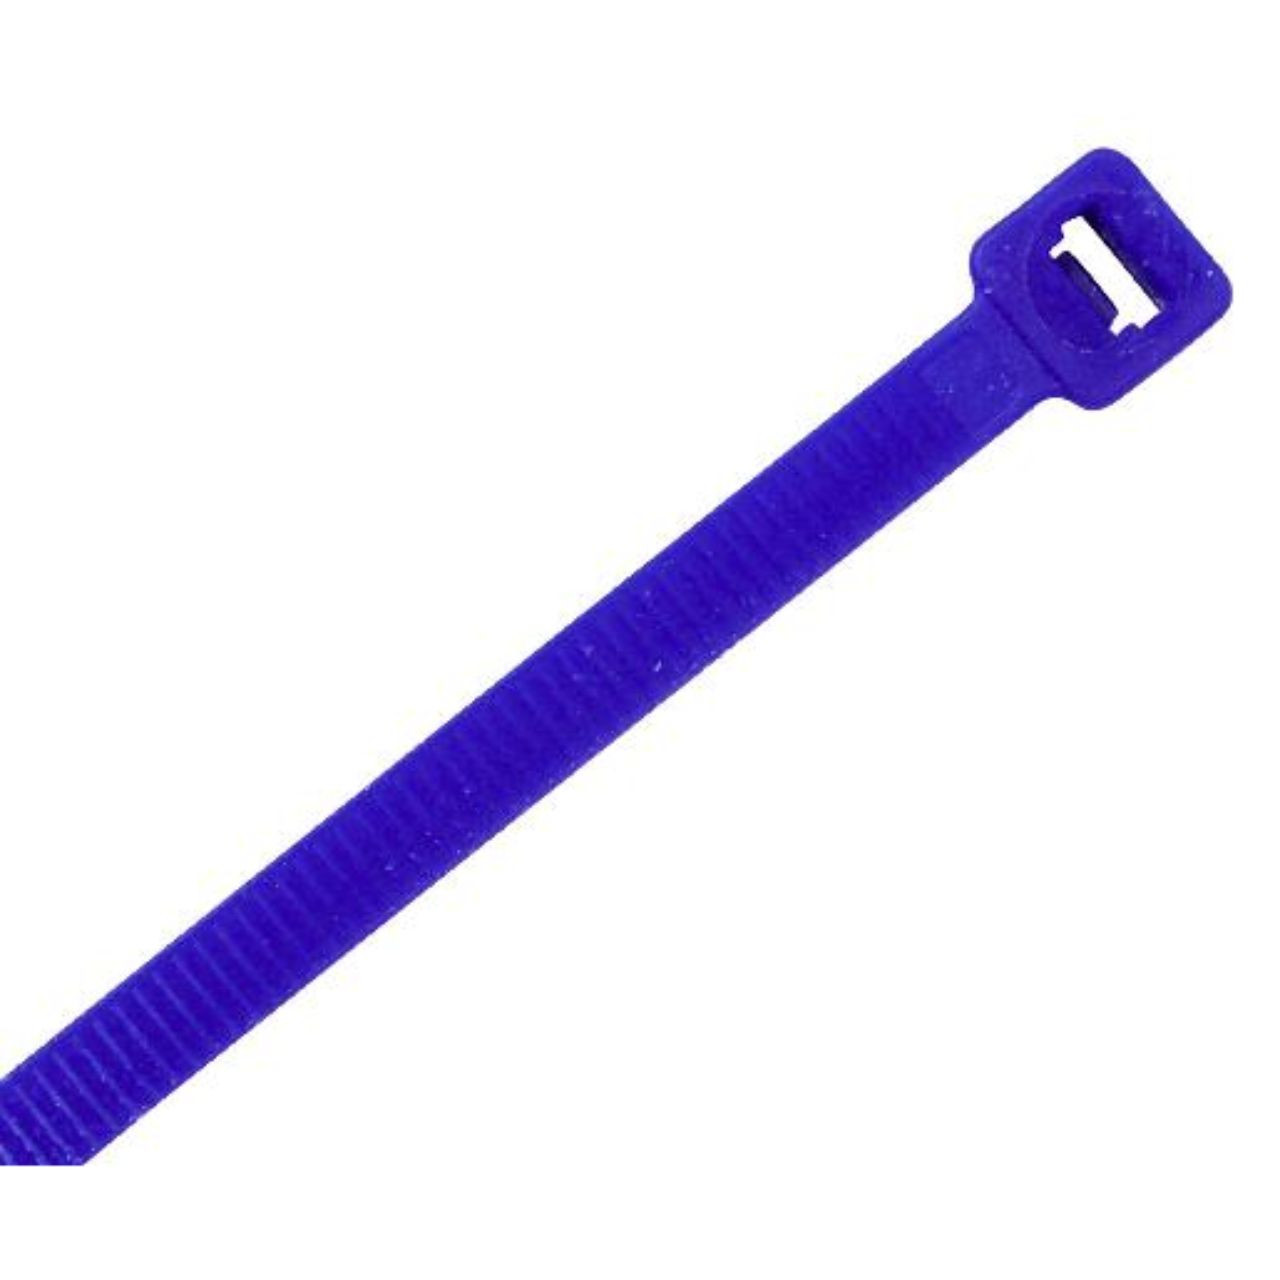 Cable Tie Blue 200 x 4.8mm 100pk